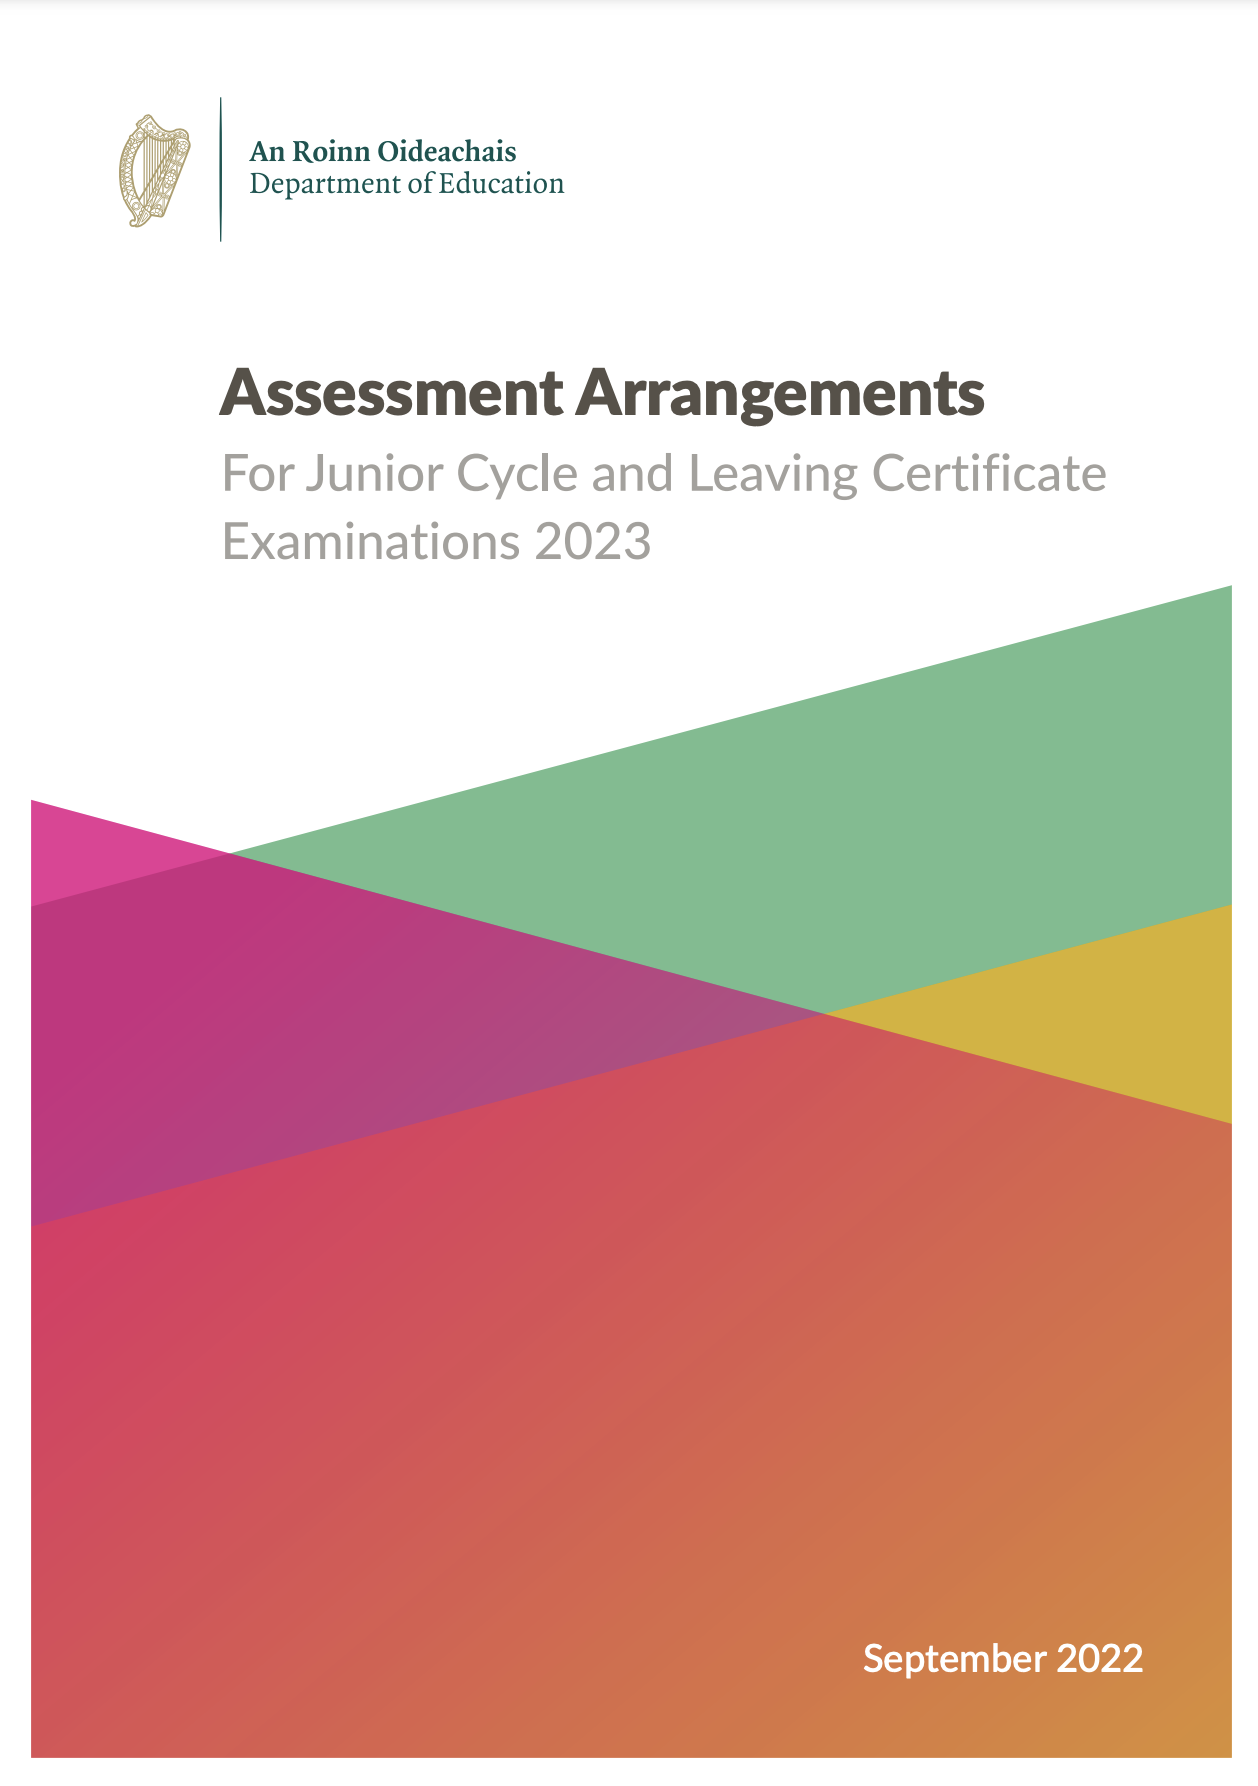 Assessment Arrangements for Junior Cycle and Leaving Certificate Examinations 2023